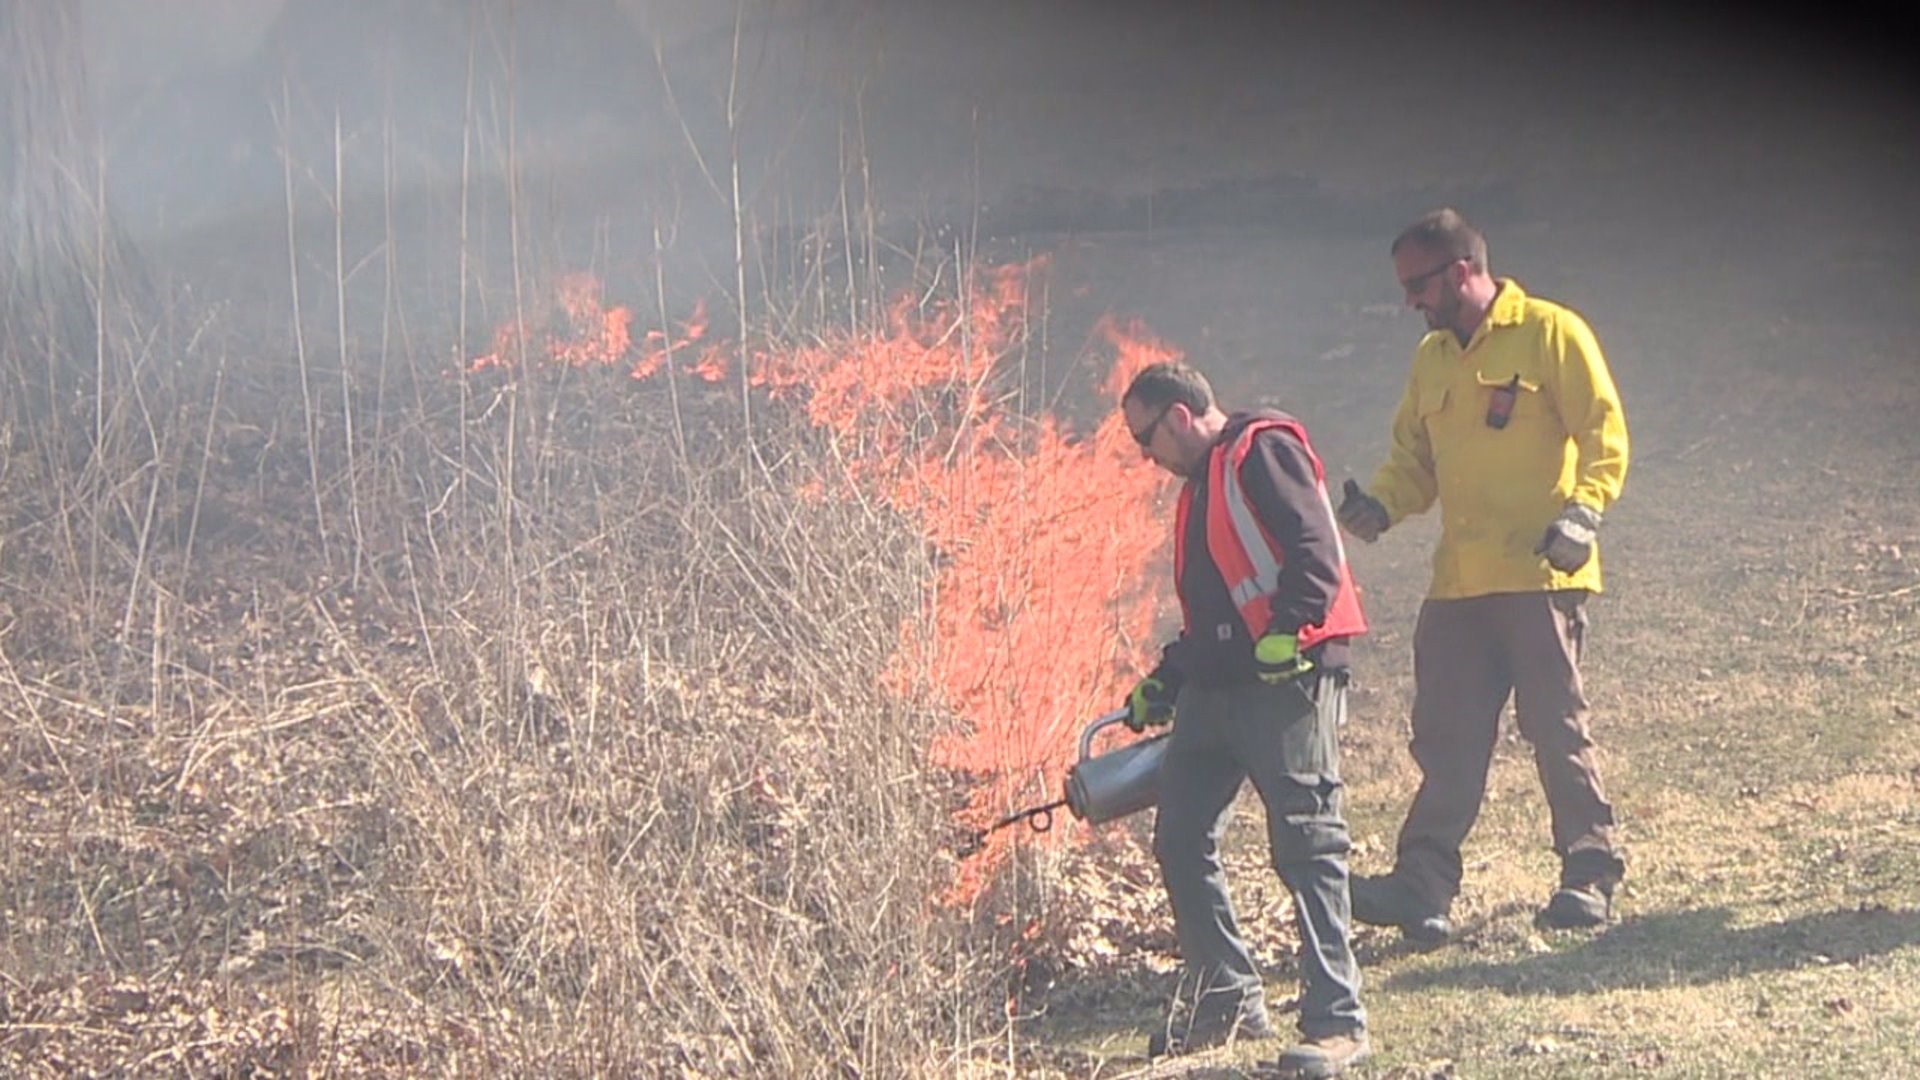 Moline conducts controlled burn at Prospect Park